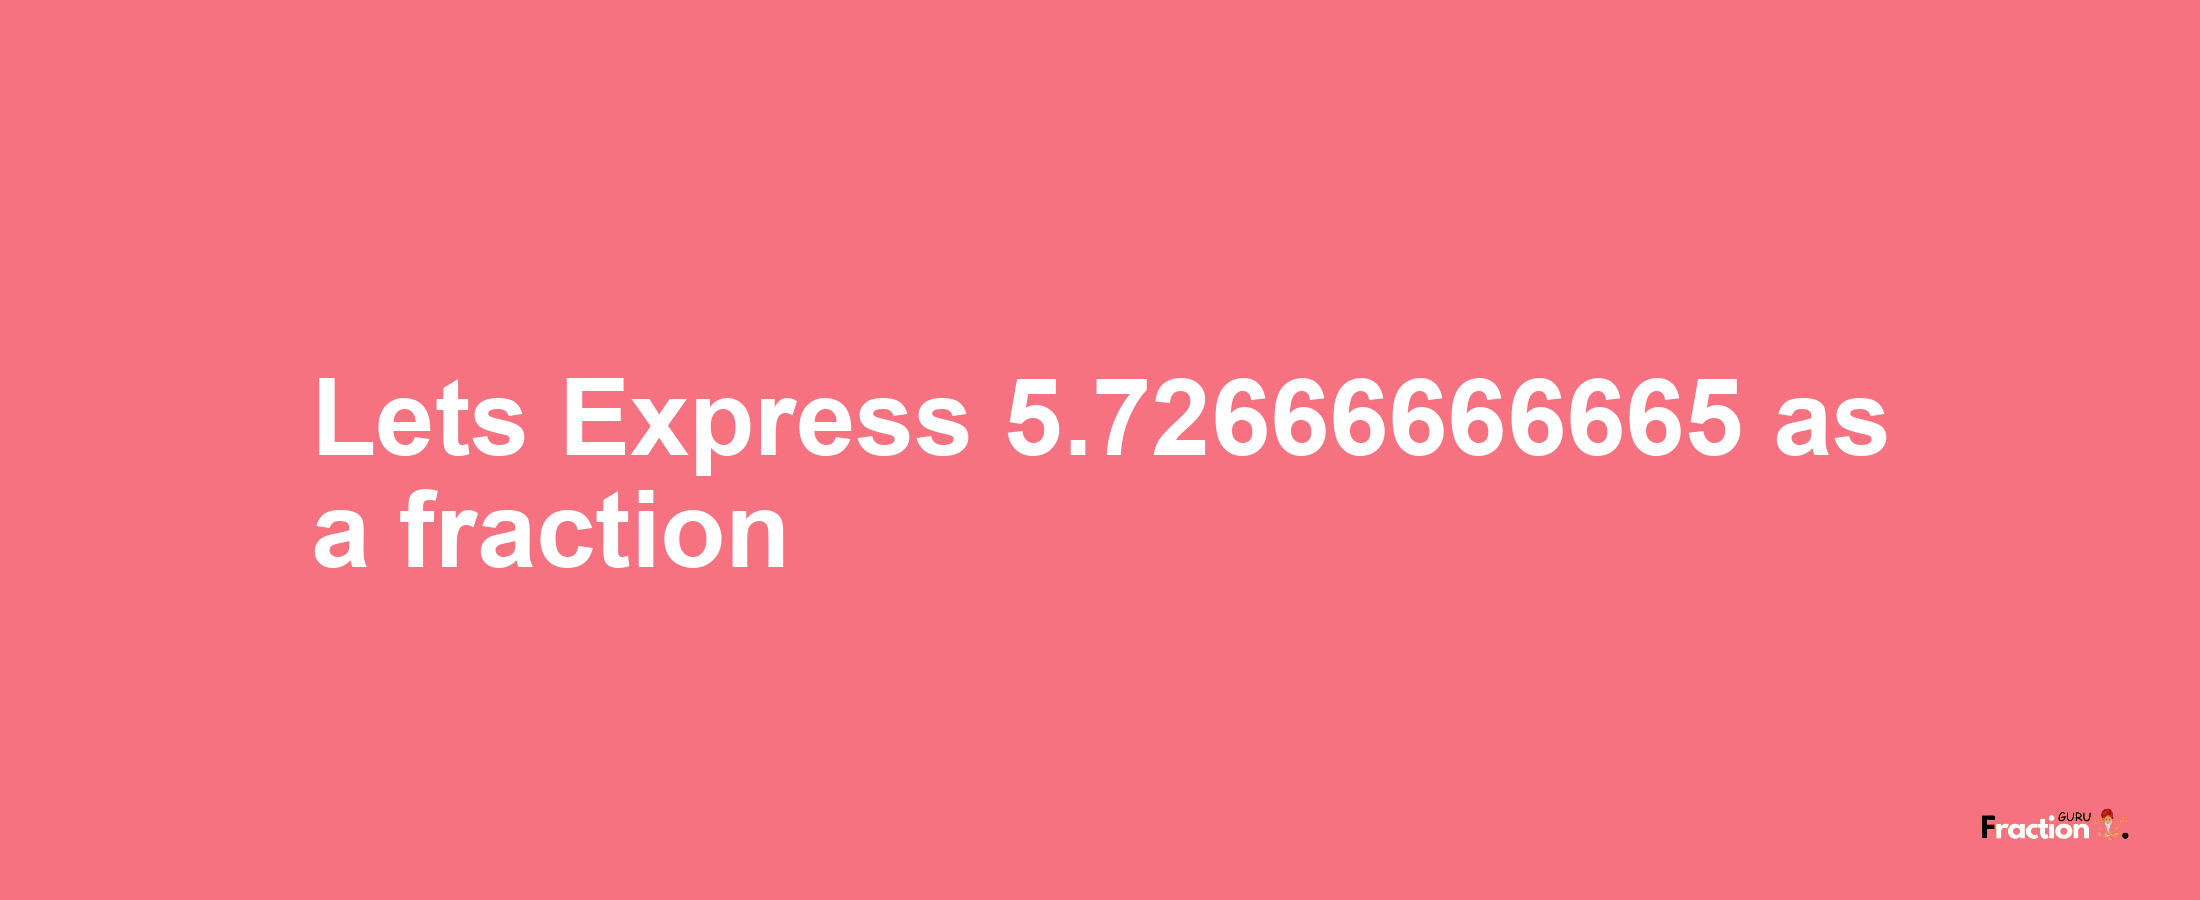 Lets Express 5.72666666665 as afraction